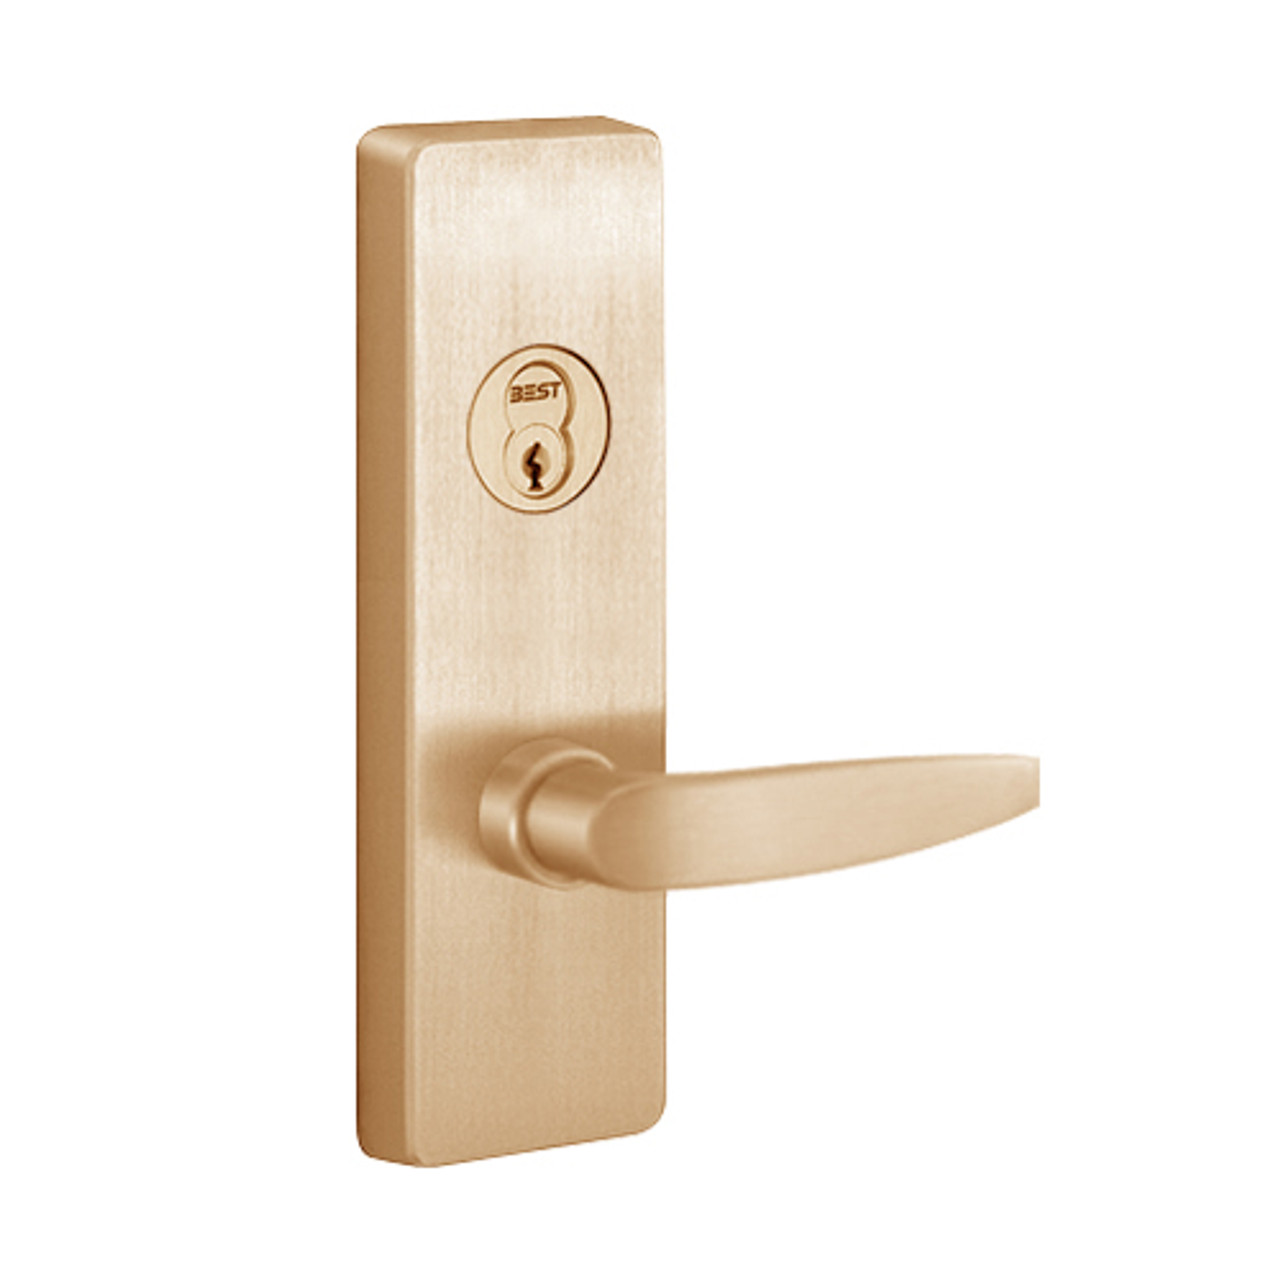 R4903B-612-RHR PHI Key Retracts Latchbolt Retrofit Trim with B Lever Design for Apex and Olympian Series Exit Device in Satin Bronze Finish